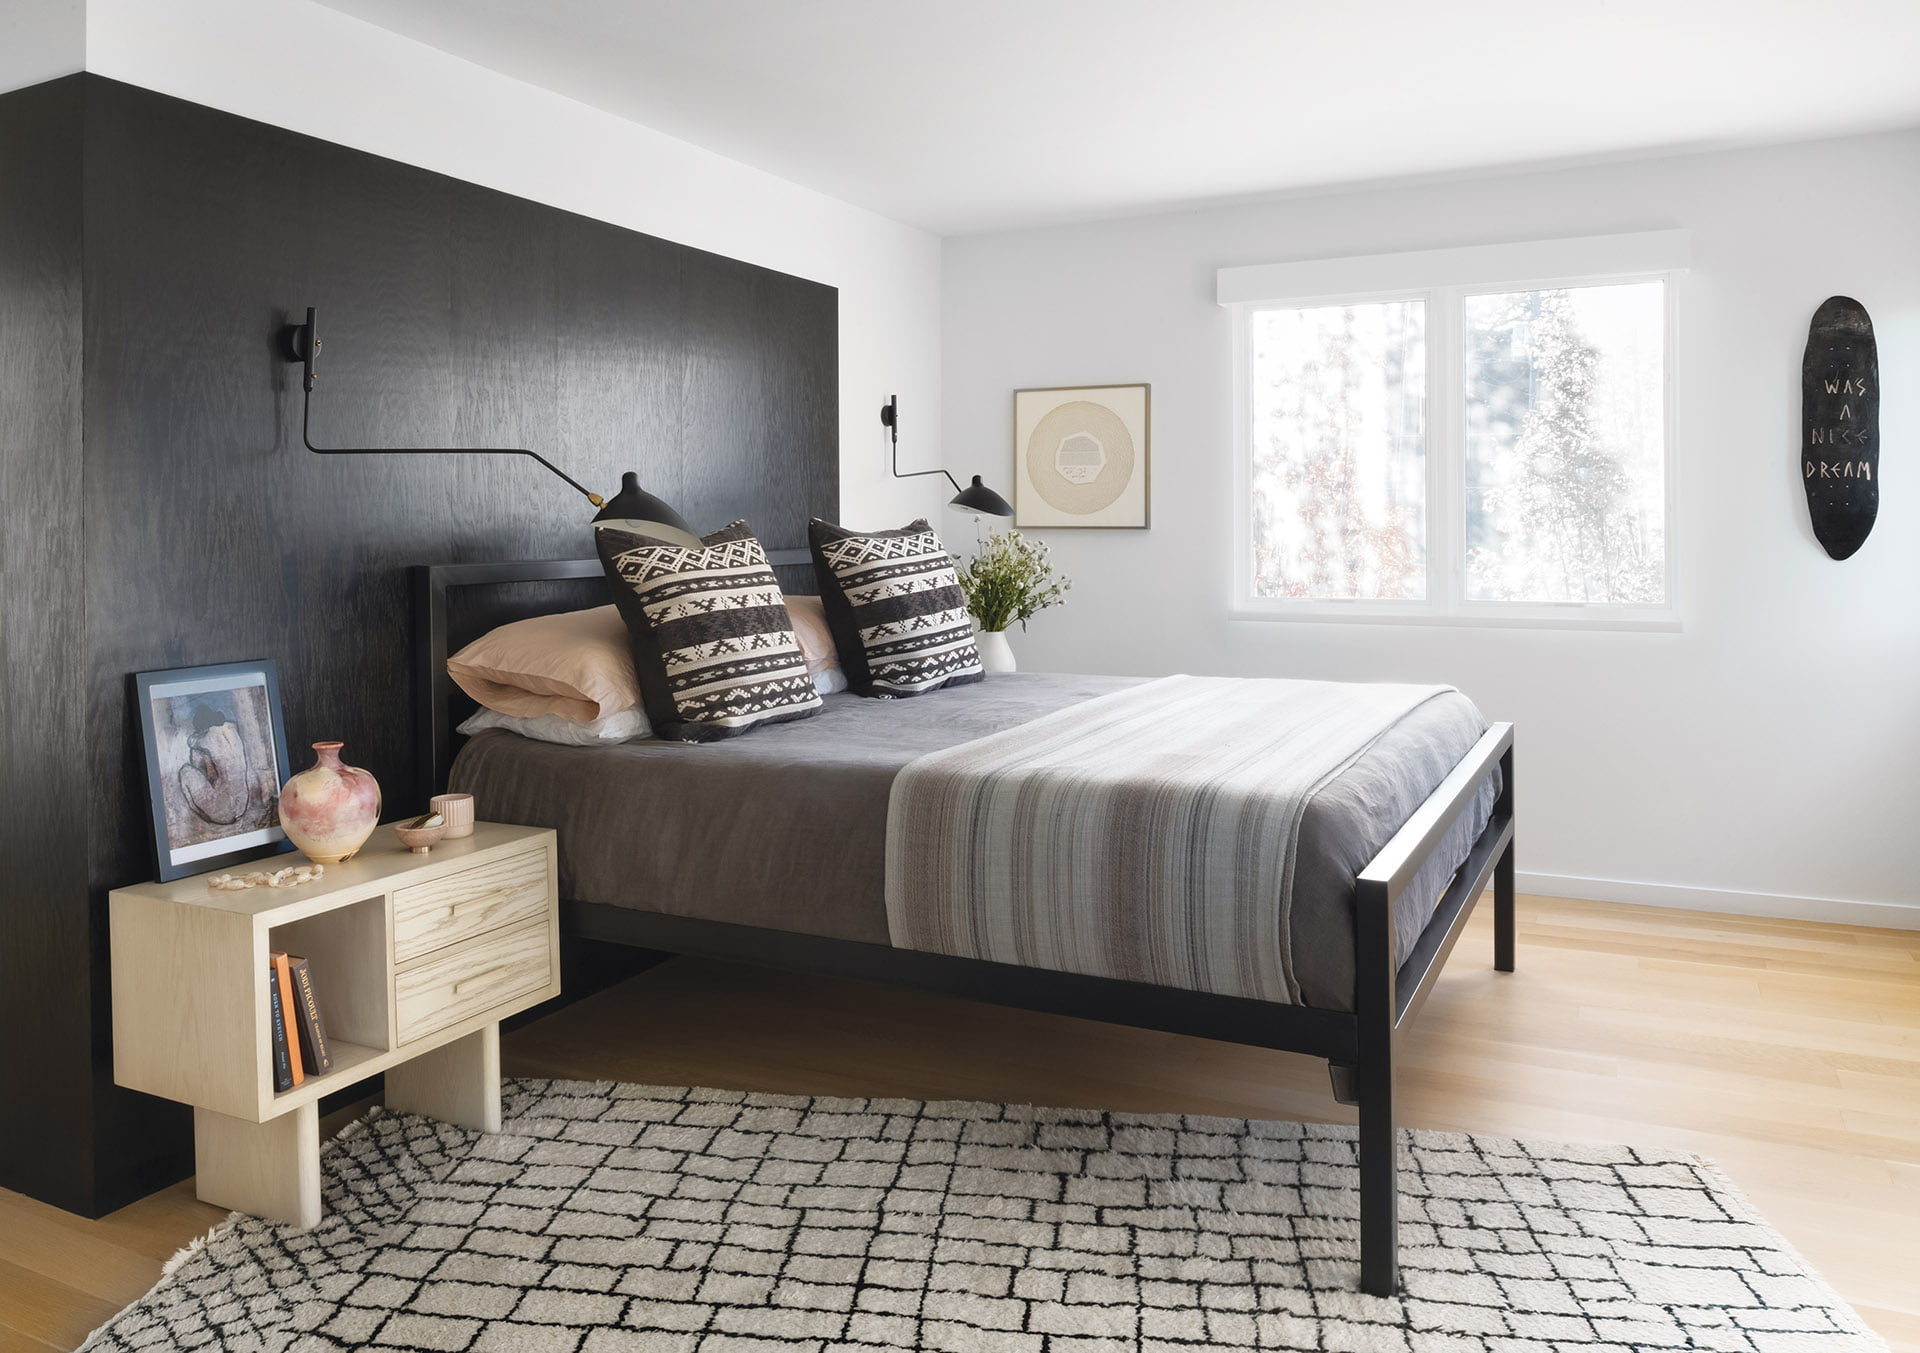 Black-stained birch panels the wall behind a Room & Board bed and Lawson-Fenning nightstand in the owners’ suite.